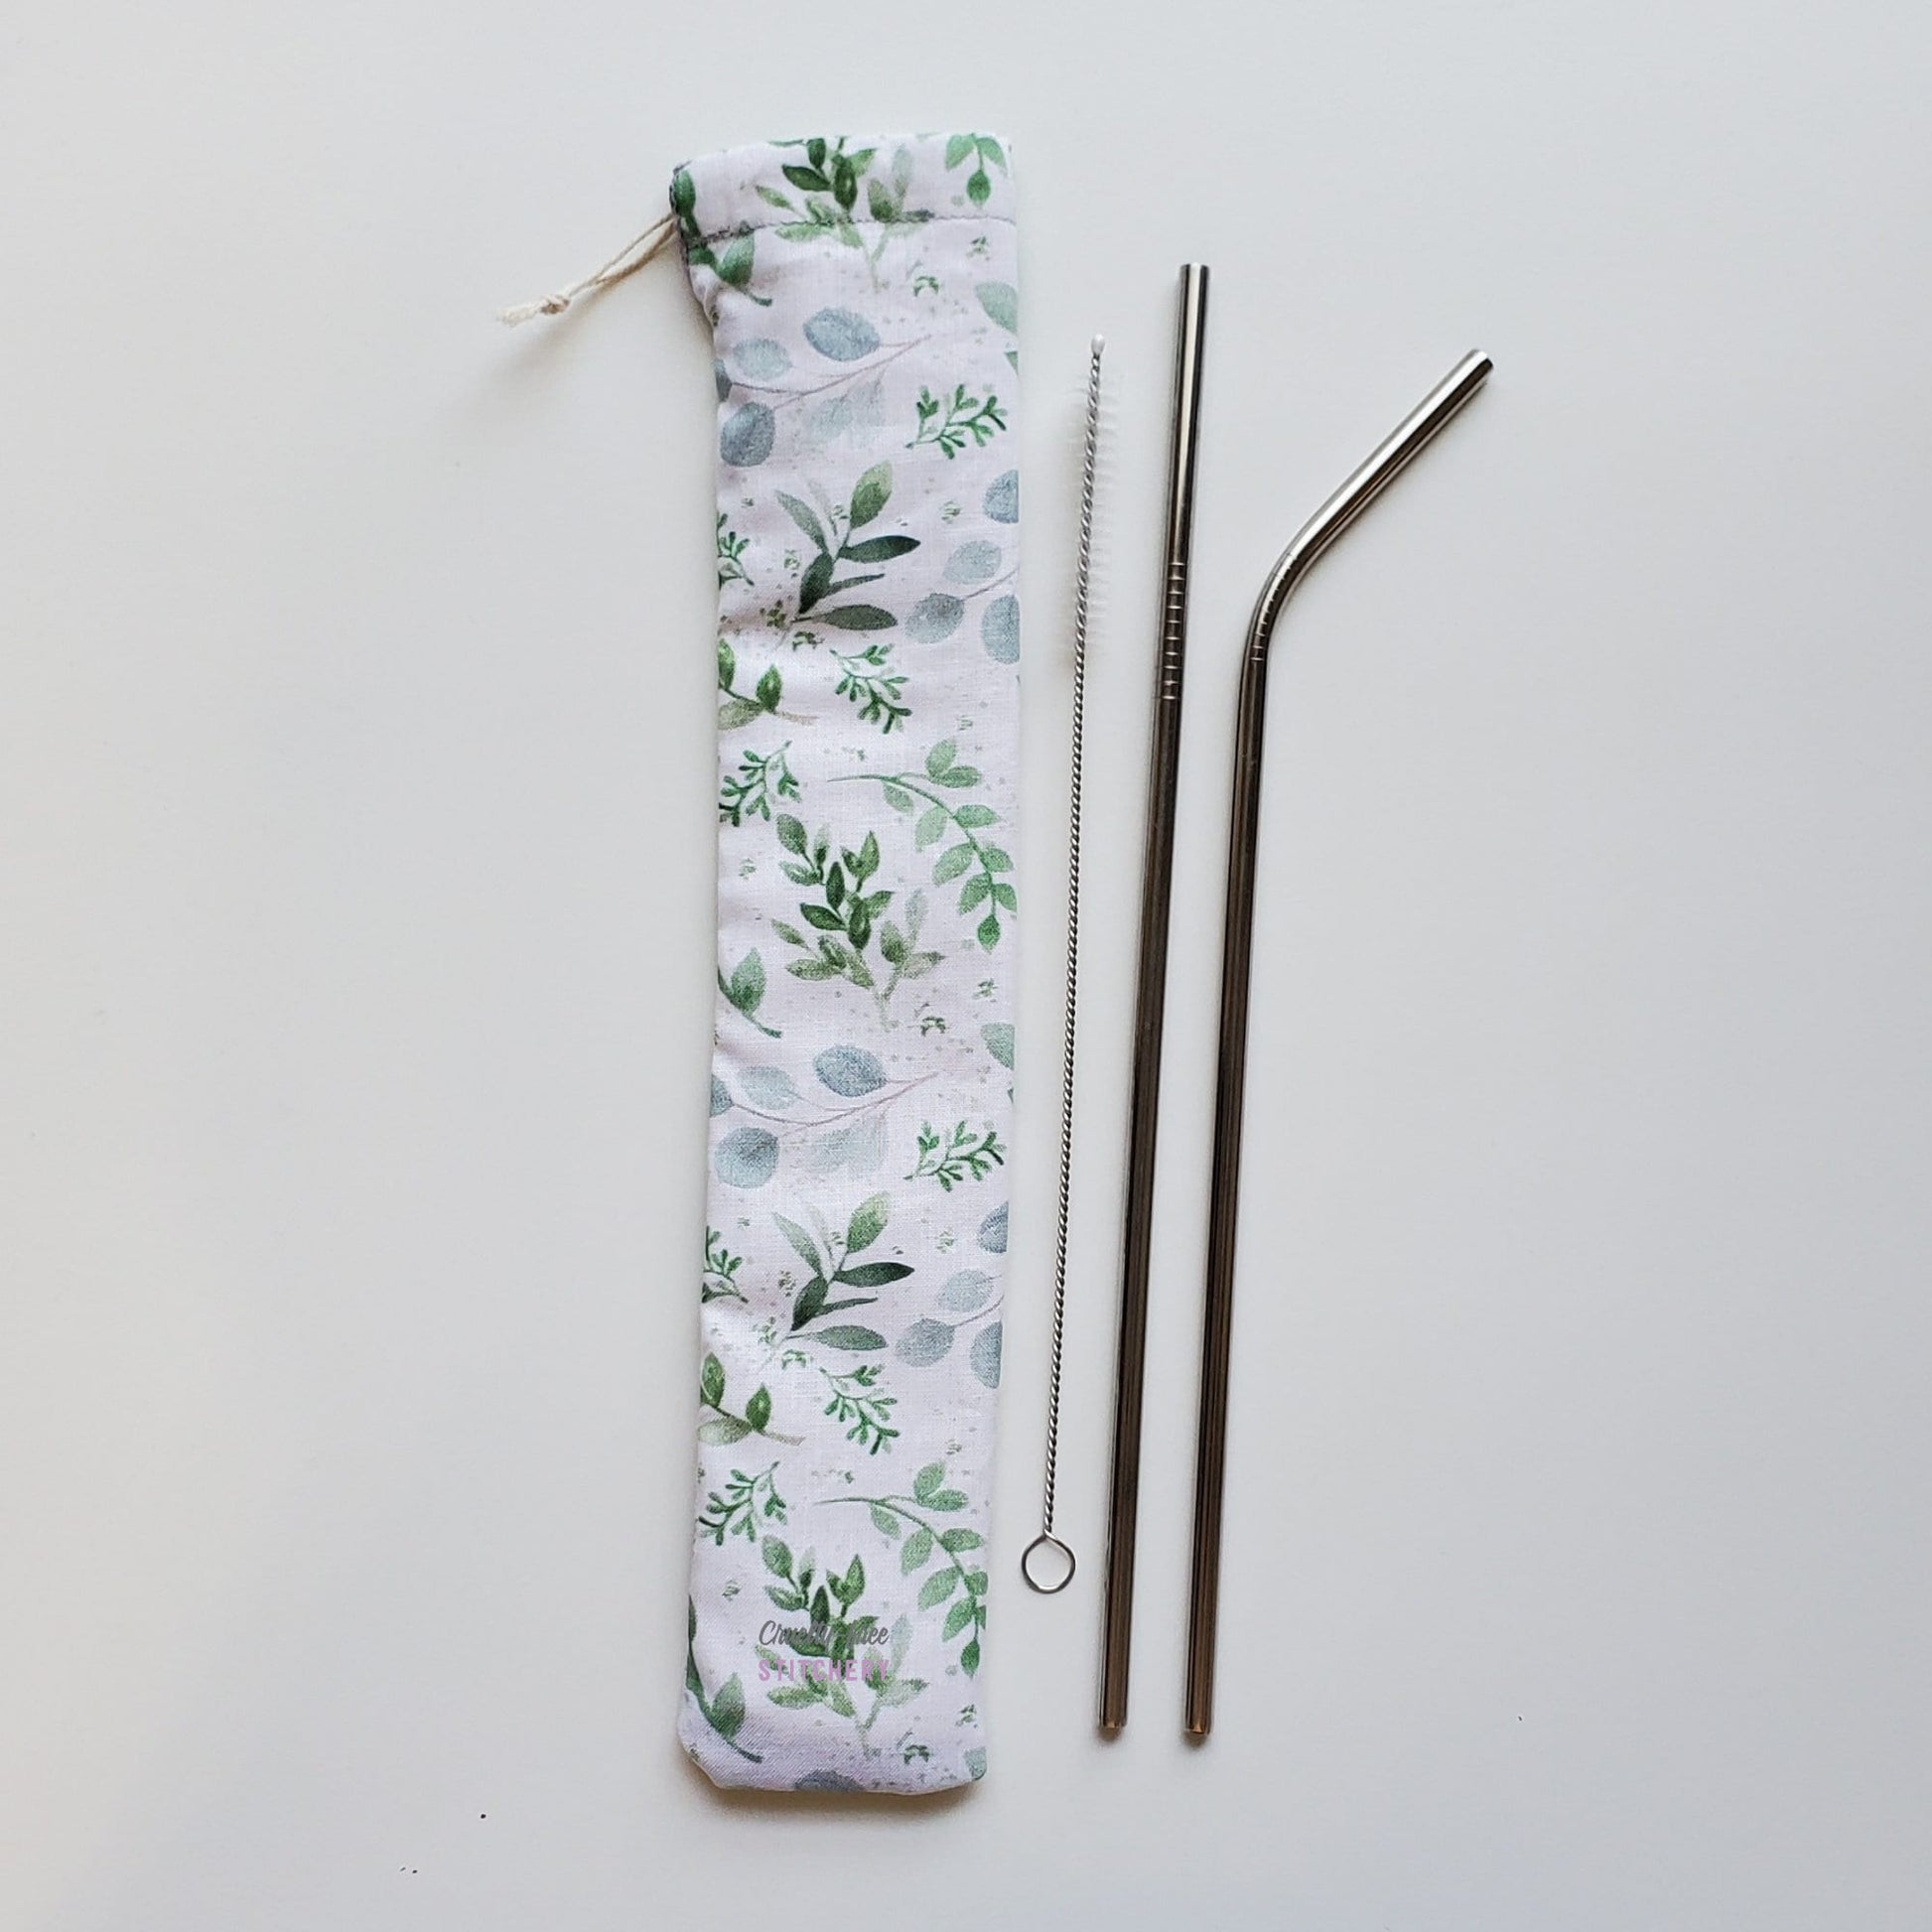 Reusable straw pouch in the same white with eucalyptus leaves print laying vertically next to a straw cleaner brush, a straight stainless steel straw, and a bent stainless steel straw.